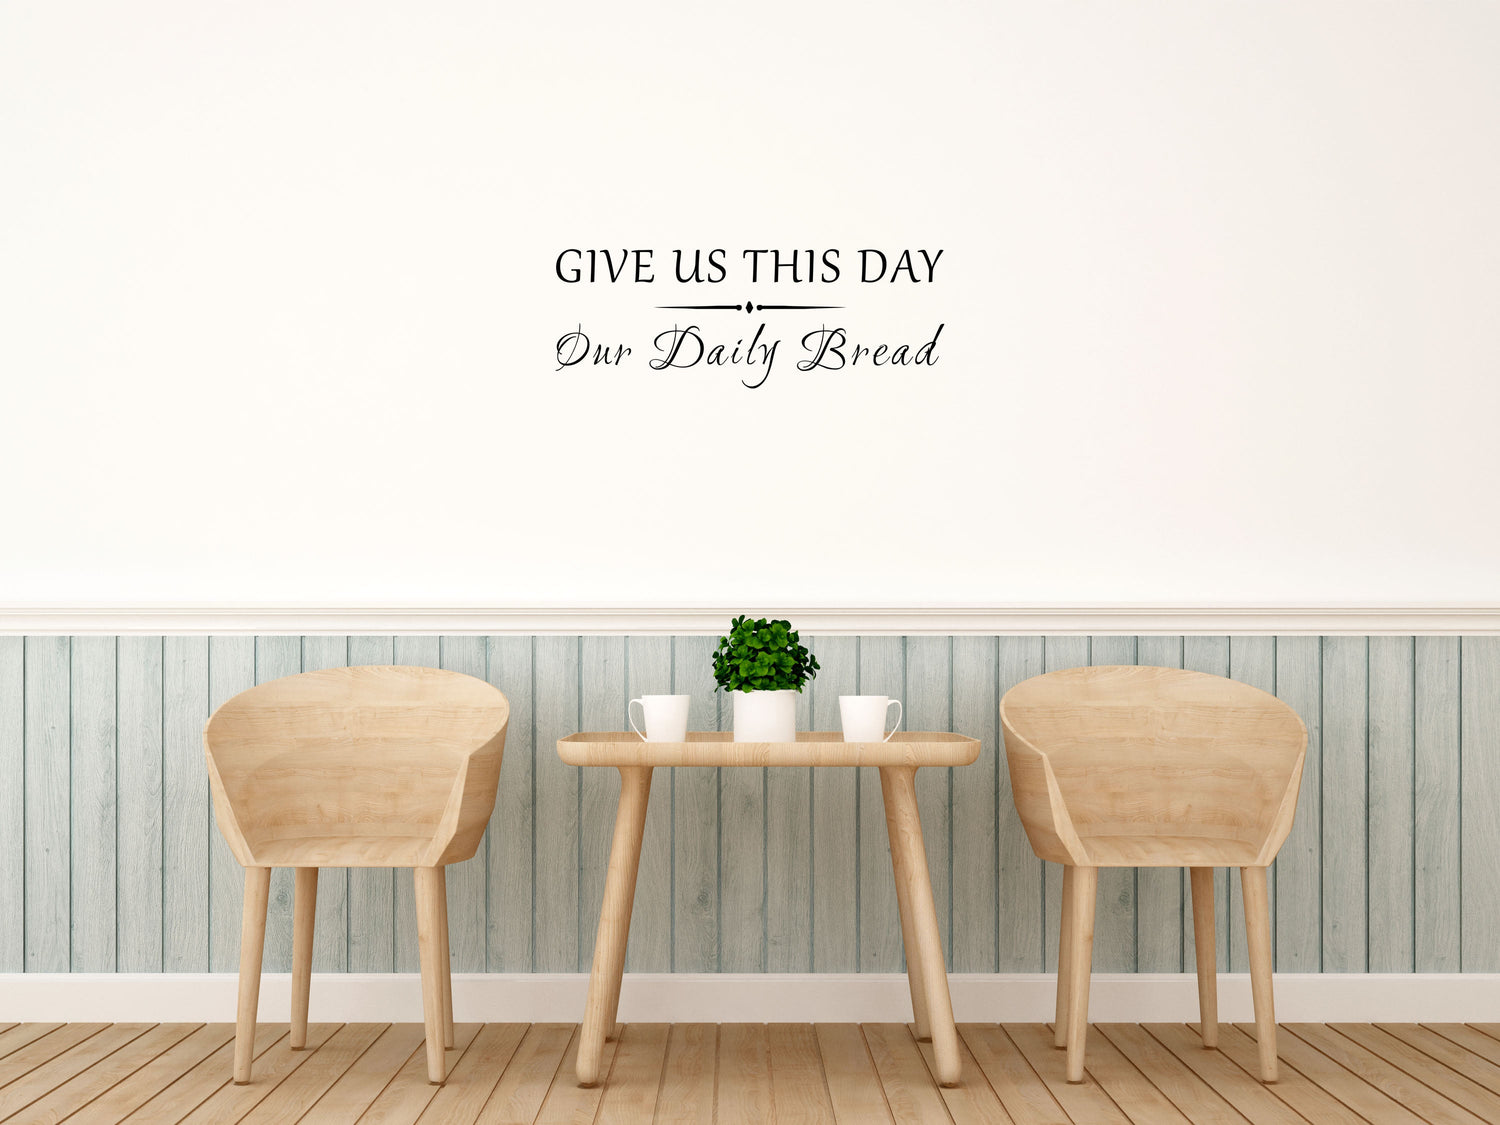 Give Us This Day Our Daily Bread - Inspirational Wall Decals Vinyl Wall Decal Inspirational Wall Signs 